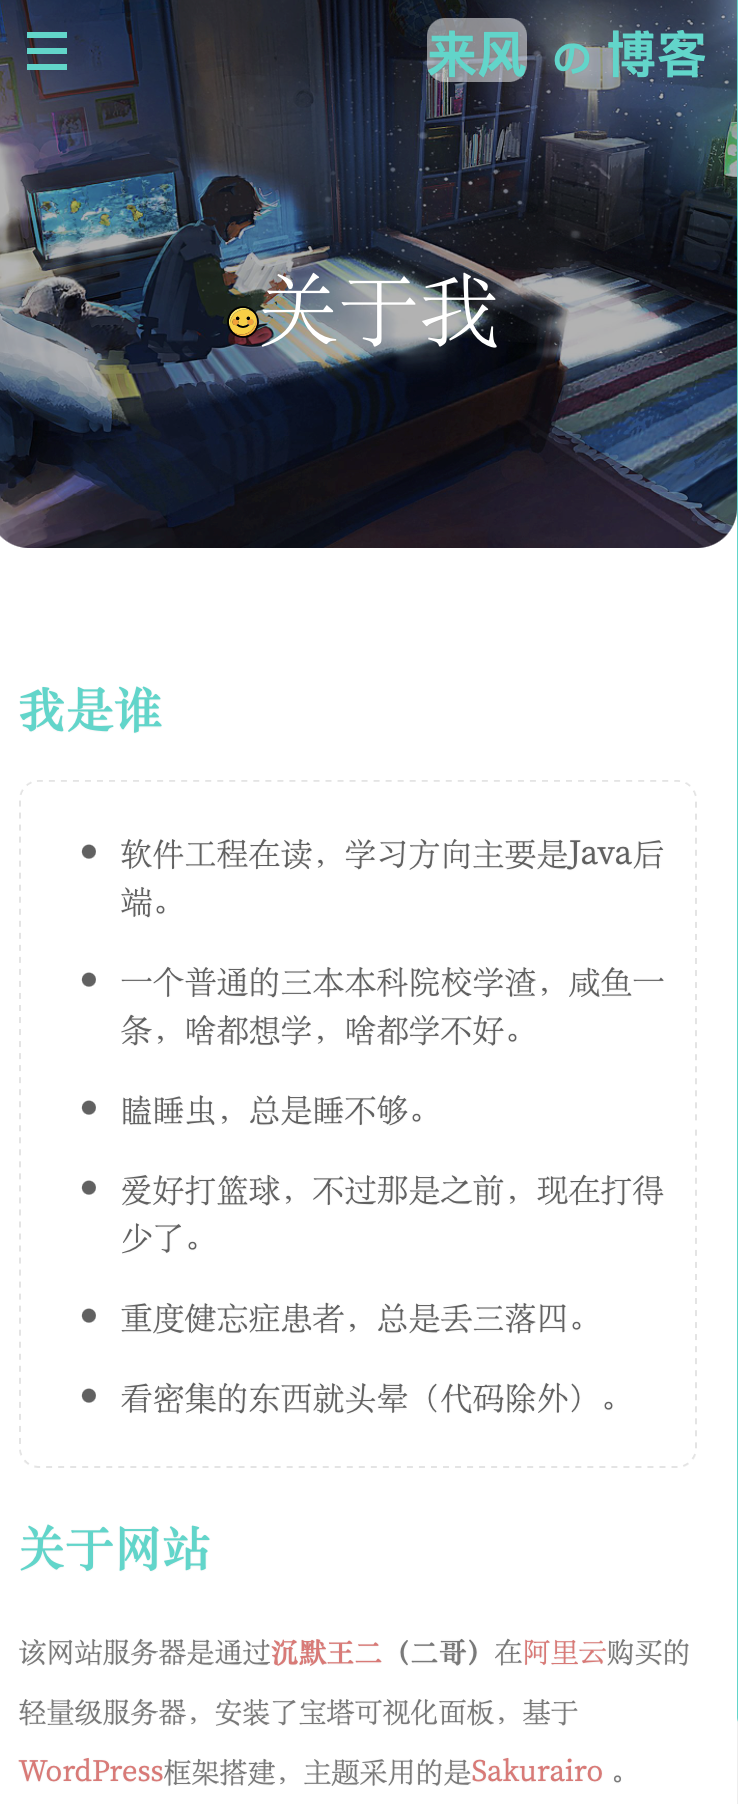 https://laifeng.xyz/about_me/